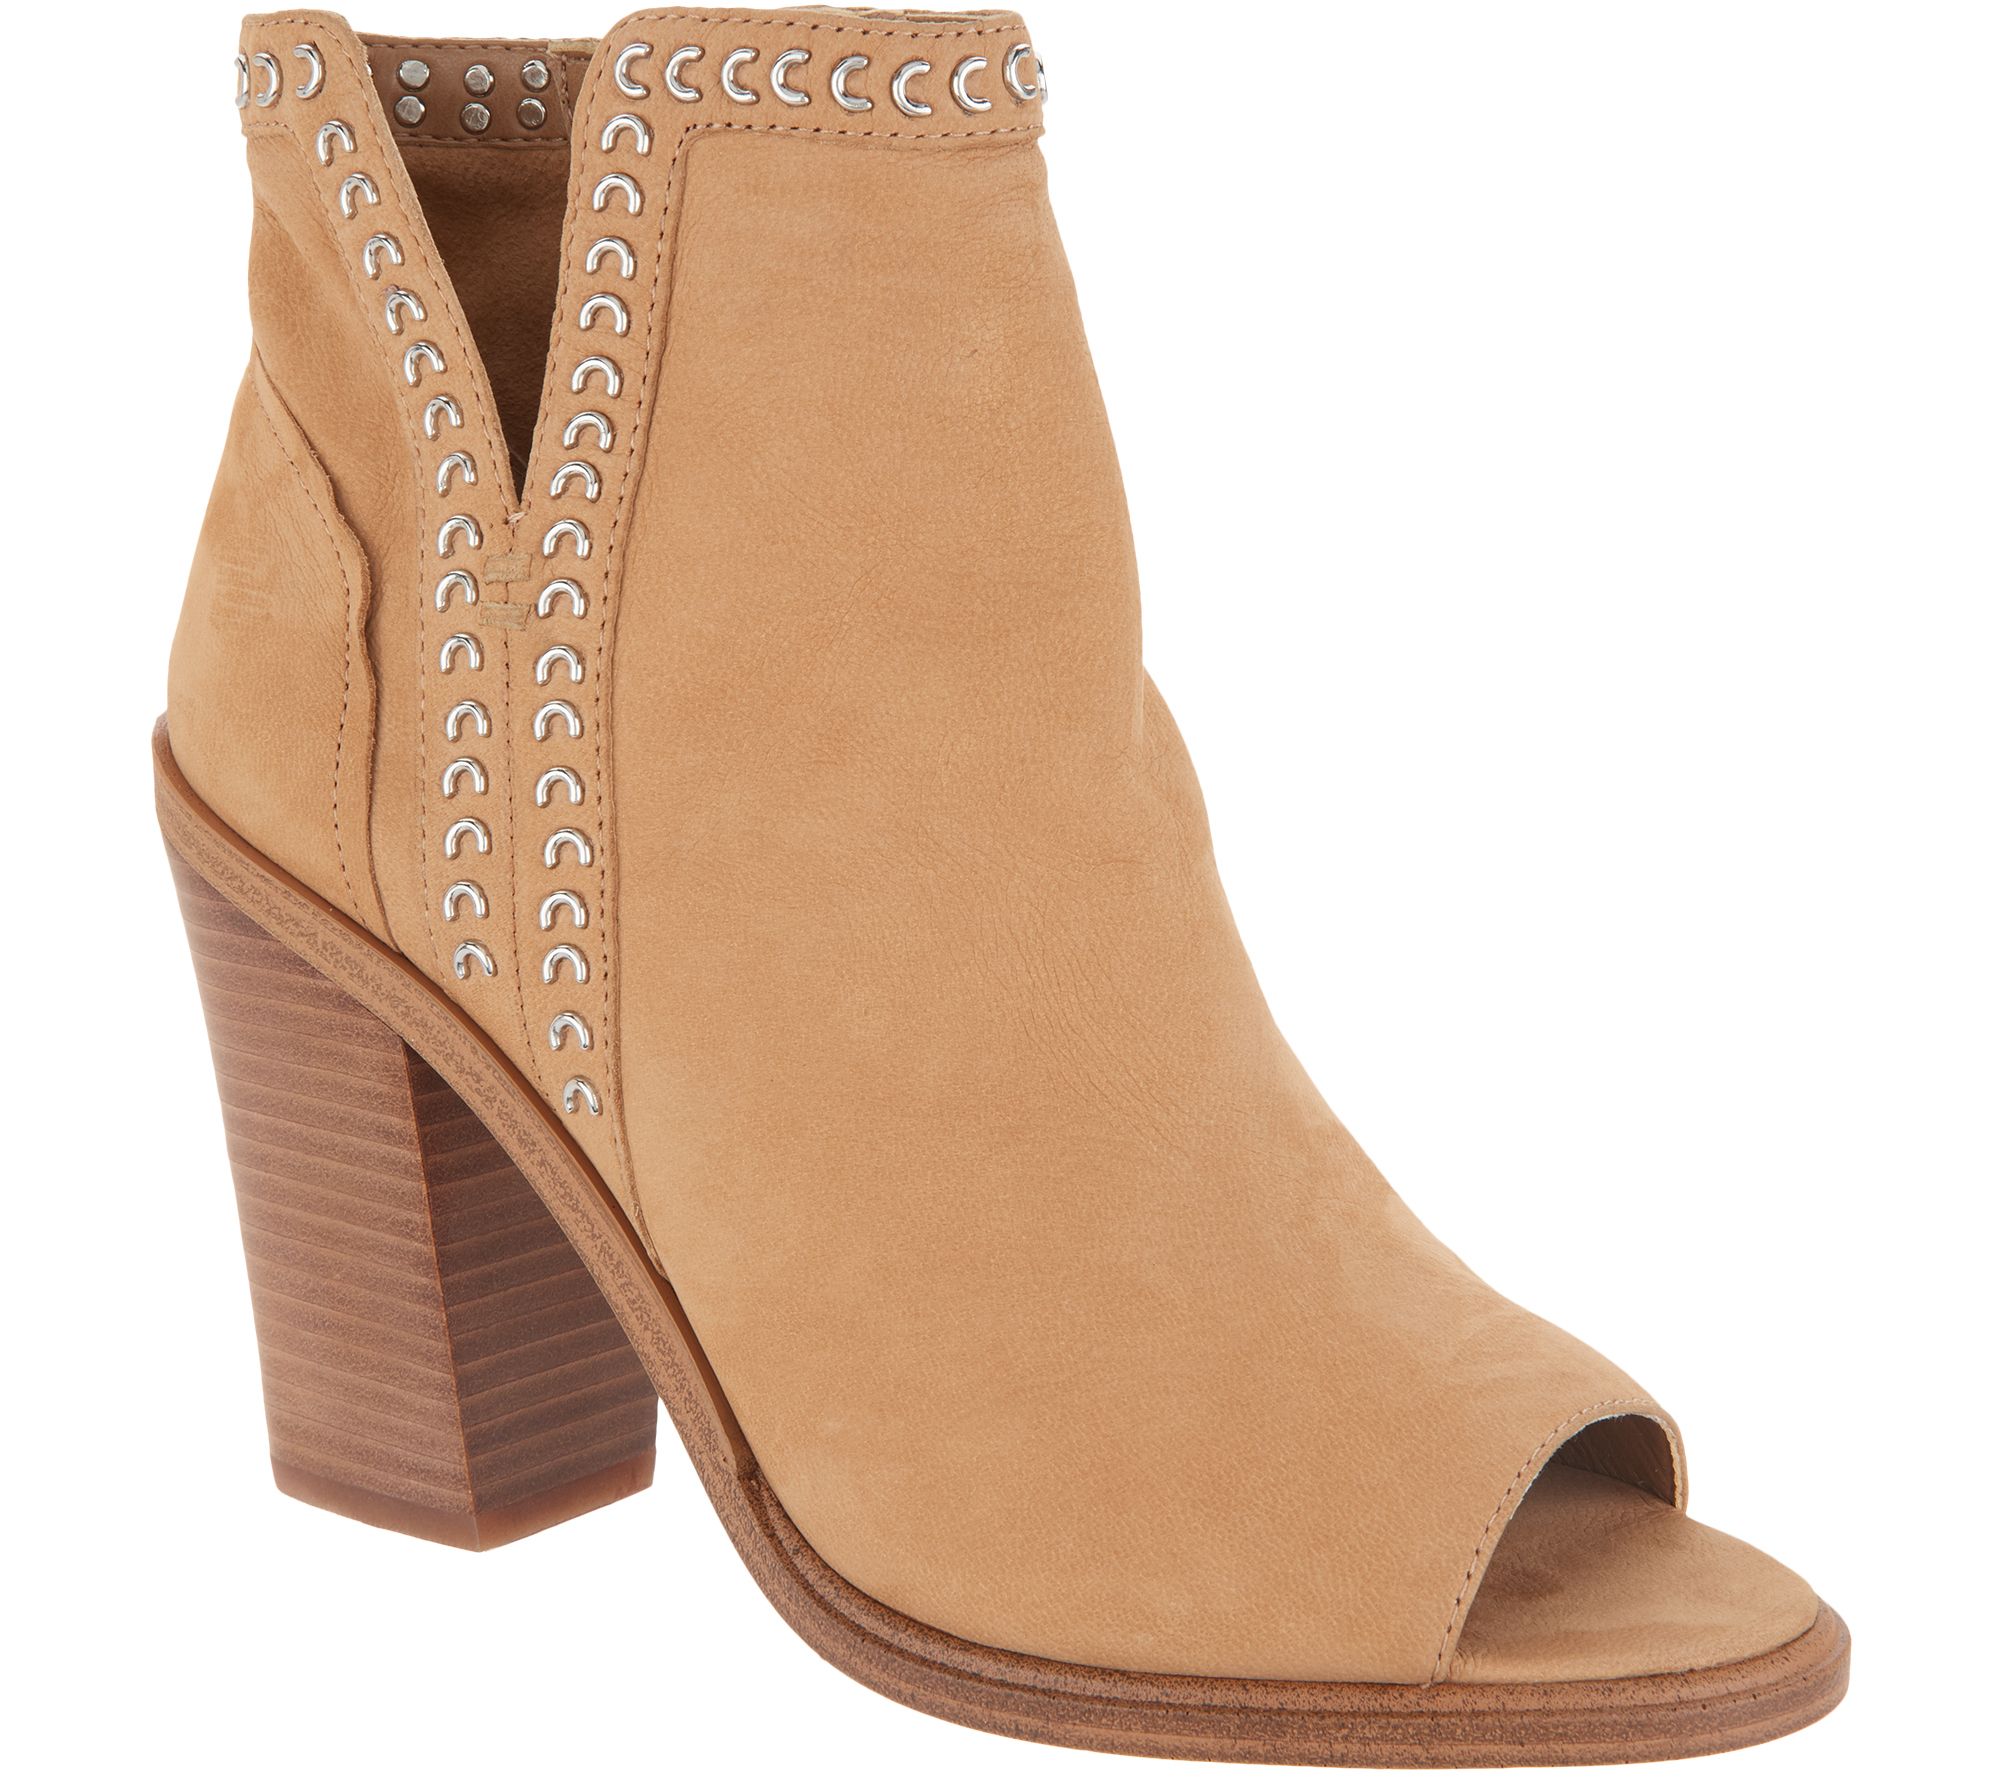 qvc vince camuto booties